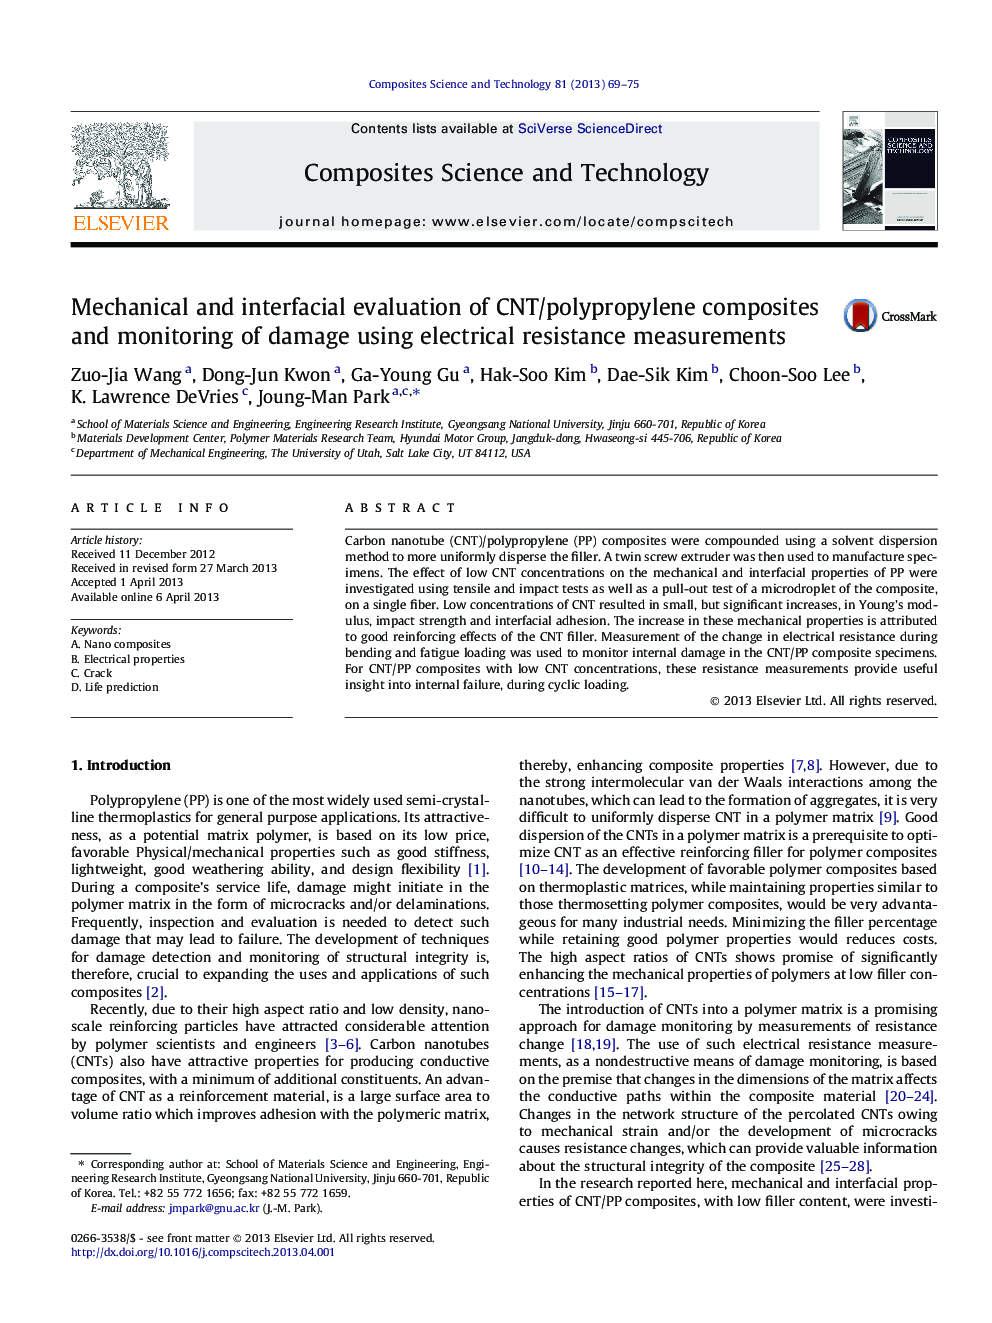 Mechanical and interfacial evaluation of CNT/polypropylene composites and monitoring of damage using electrical resistance measurements